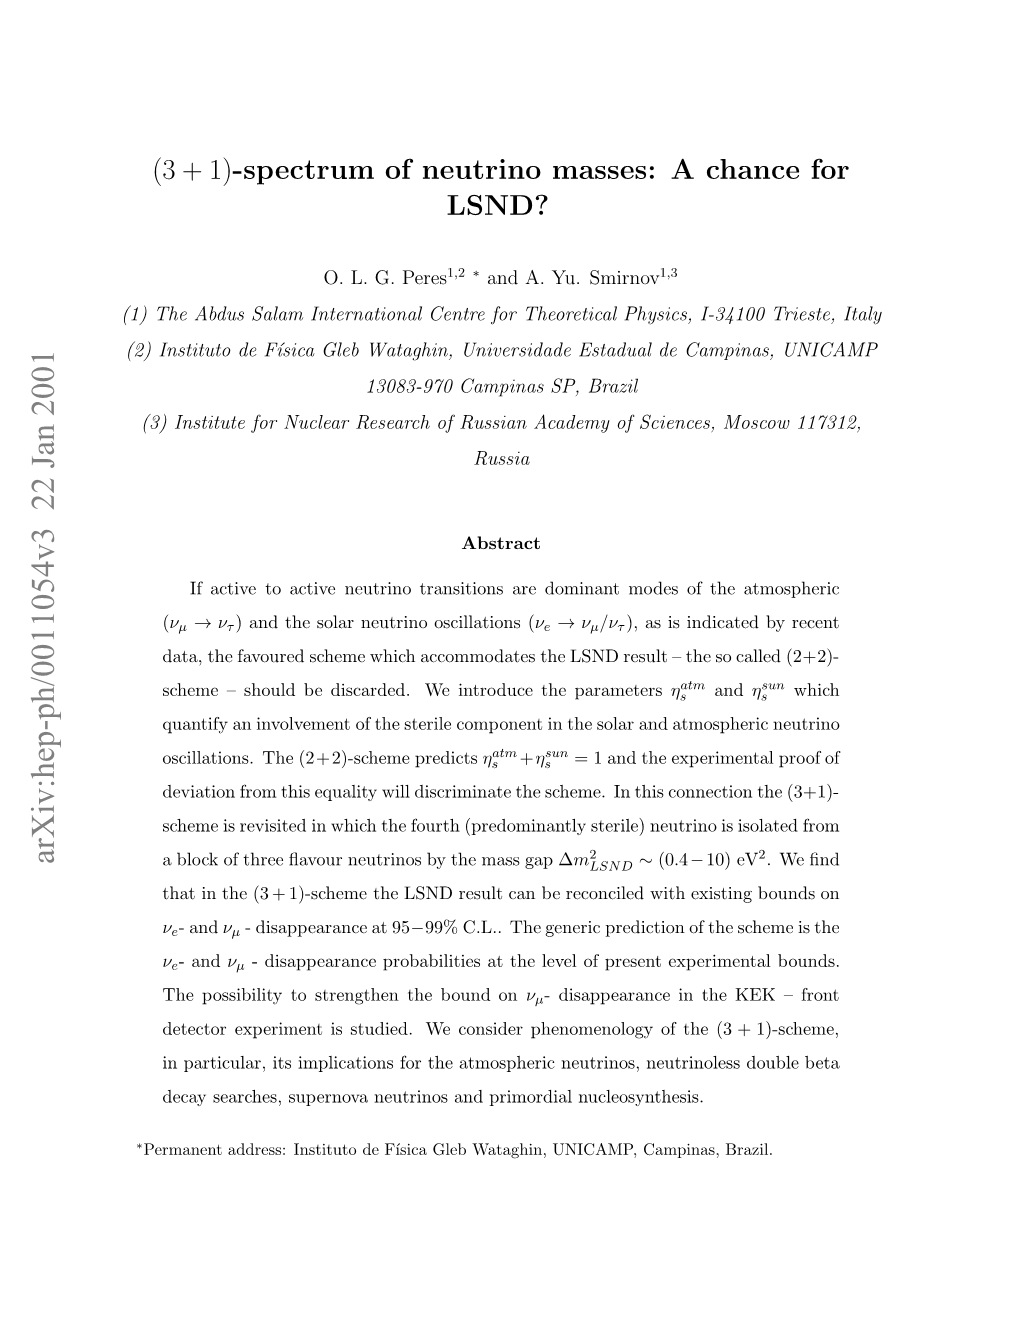 (3+ 1)-Spectrum of Neutrino Masses: a Chance for LSND?